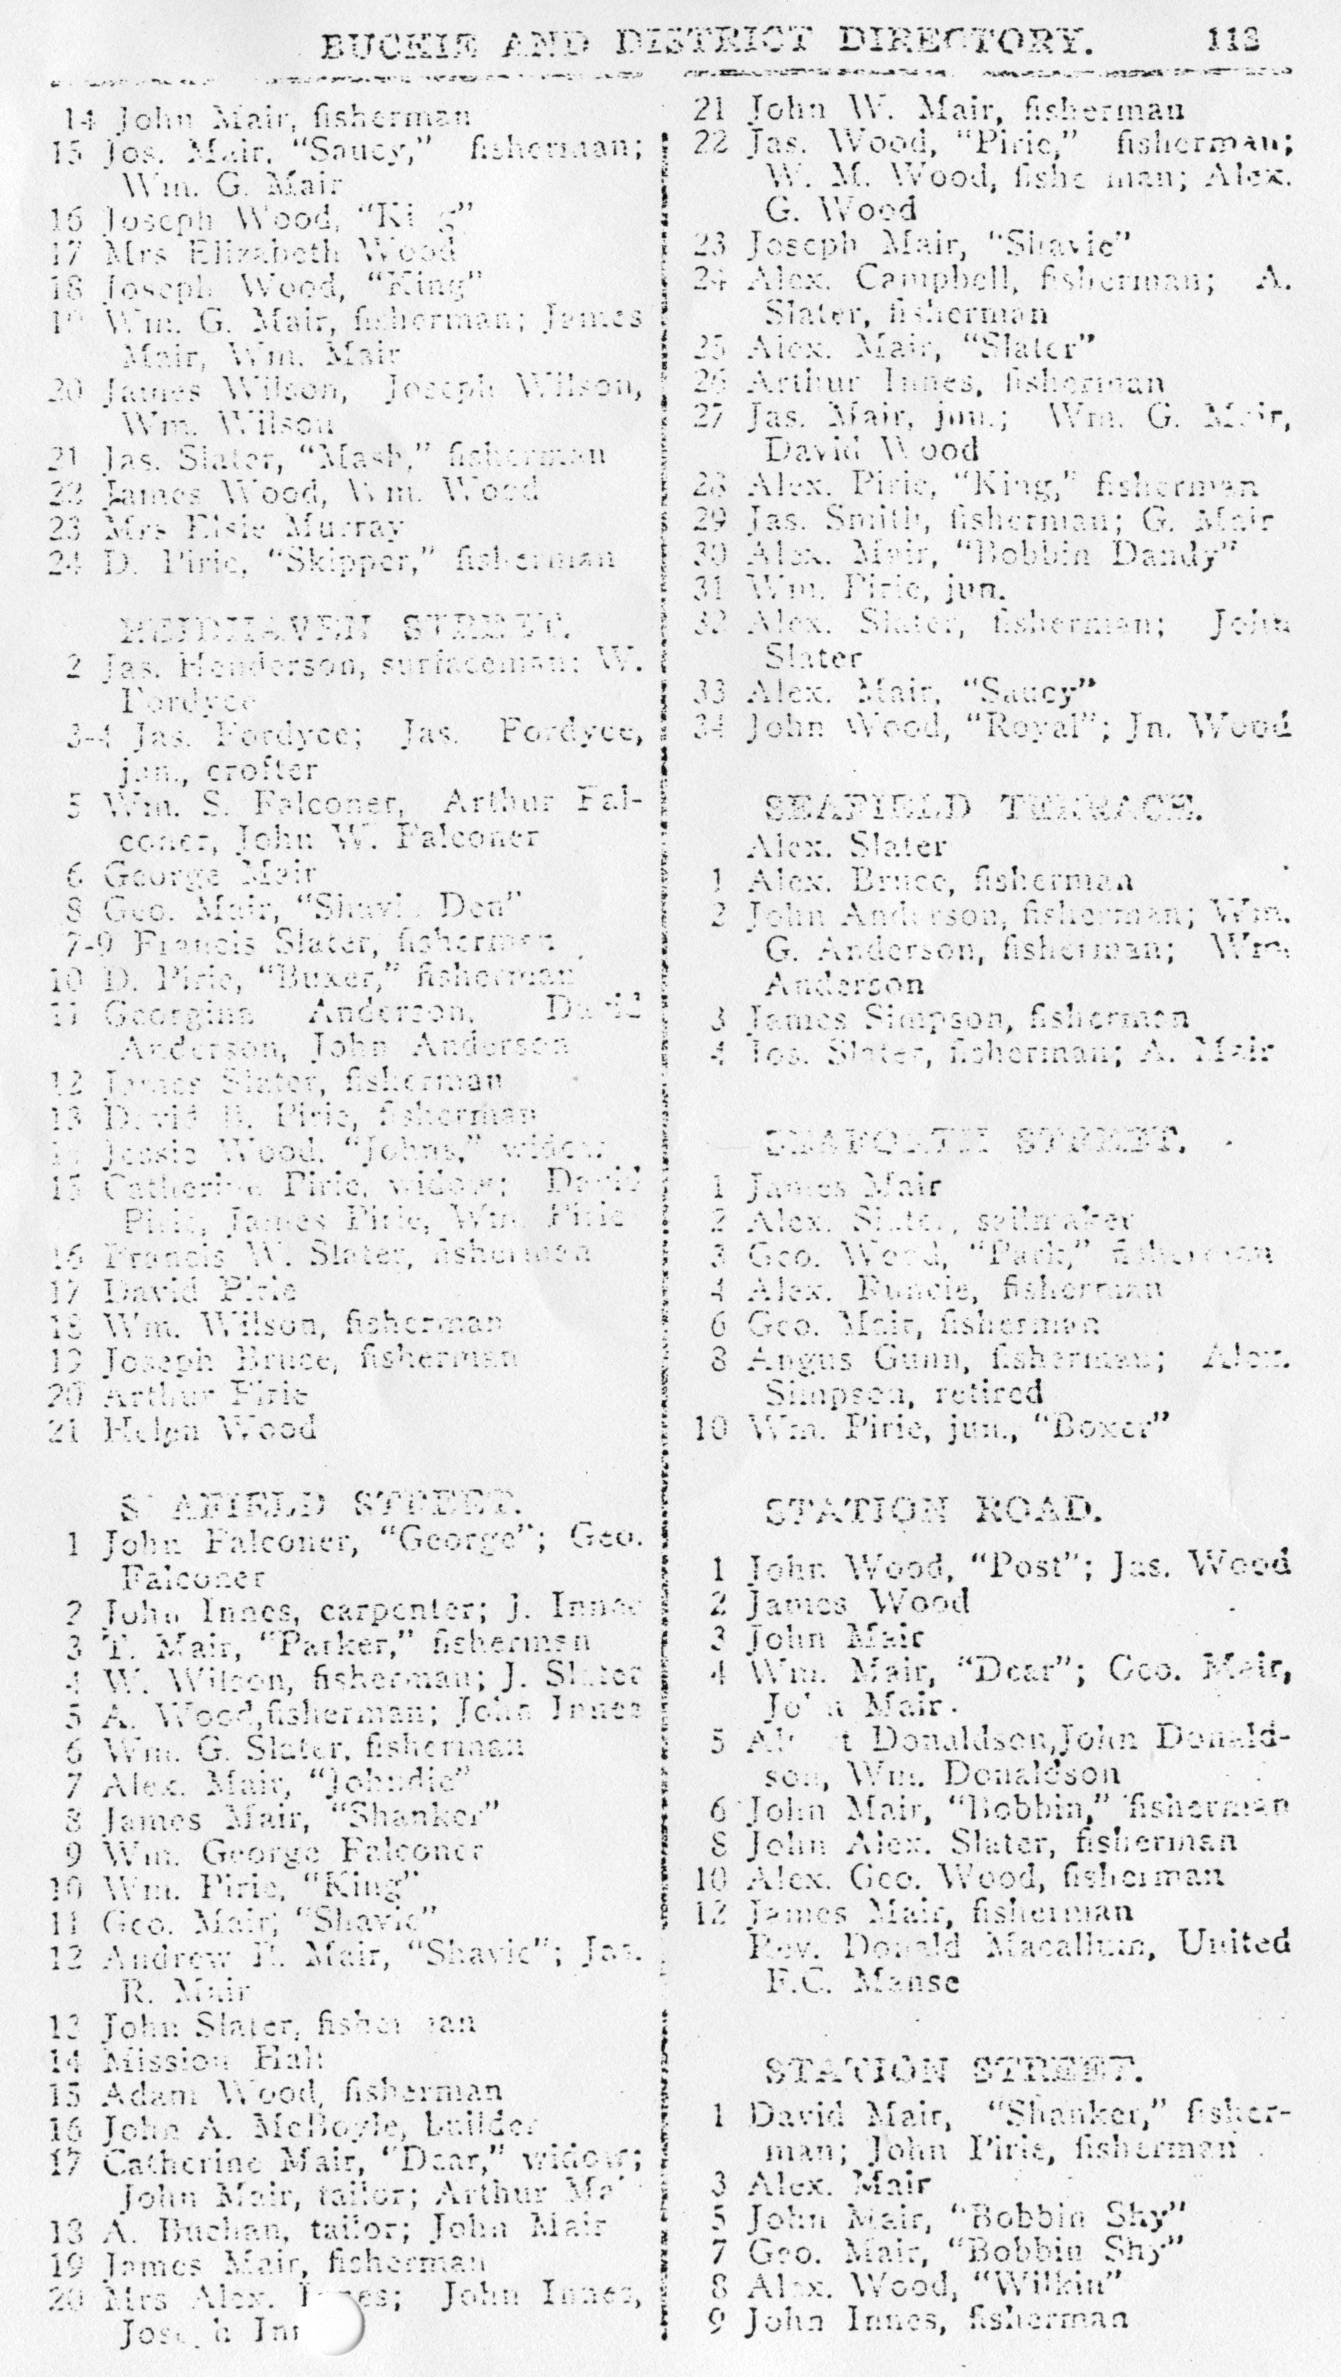 Buckie and District Directory 1926, page 113, Portknockie by street / house